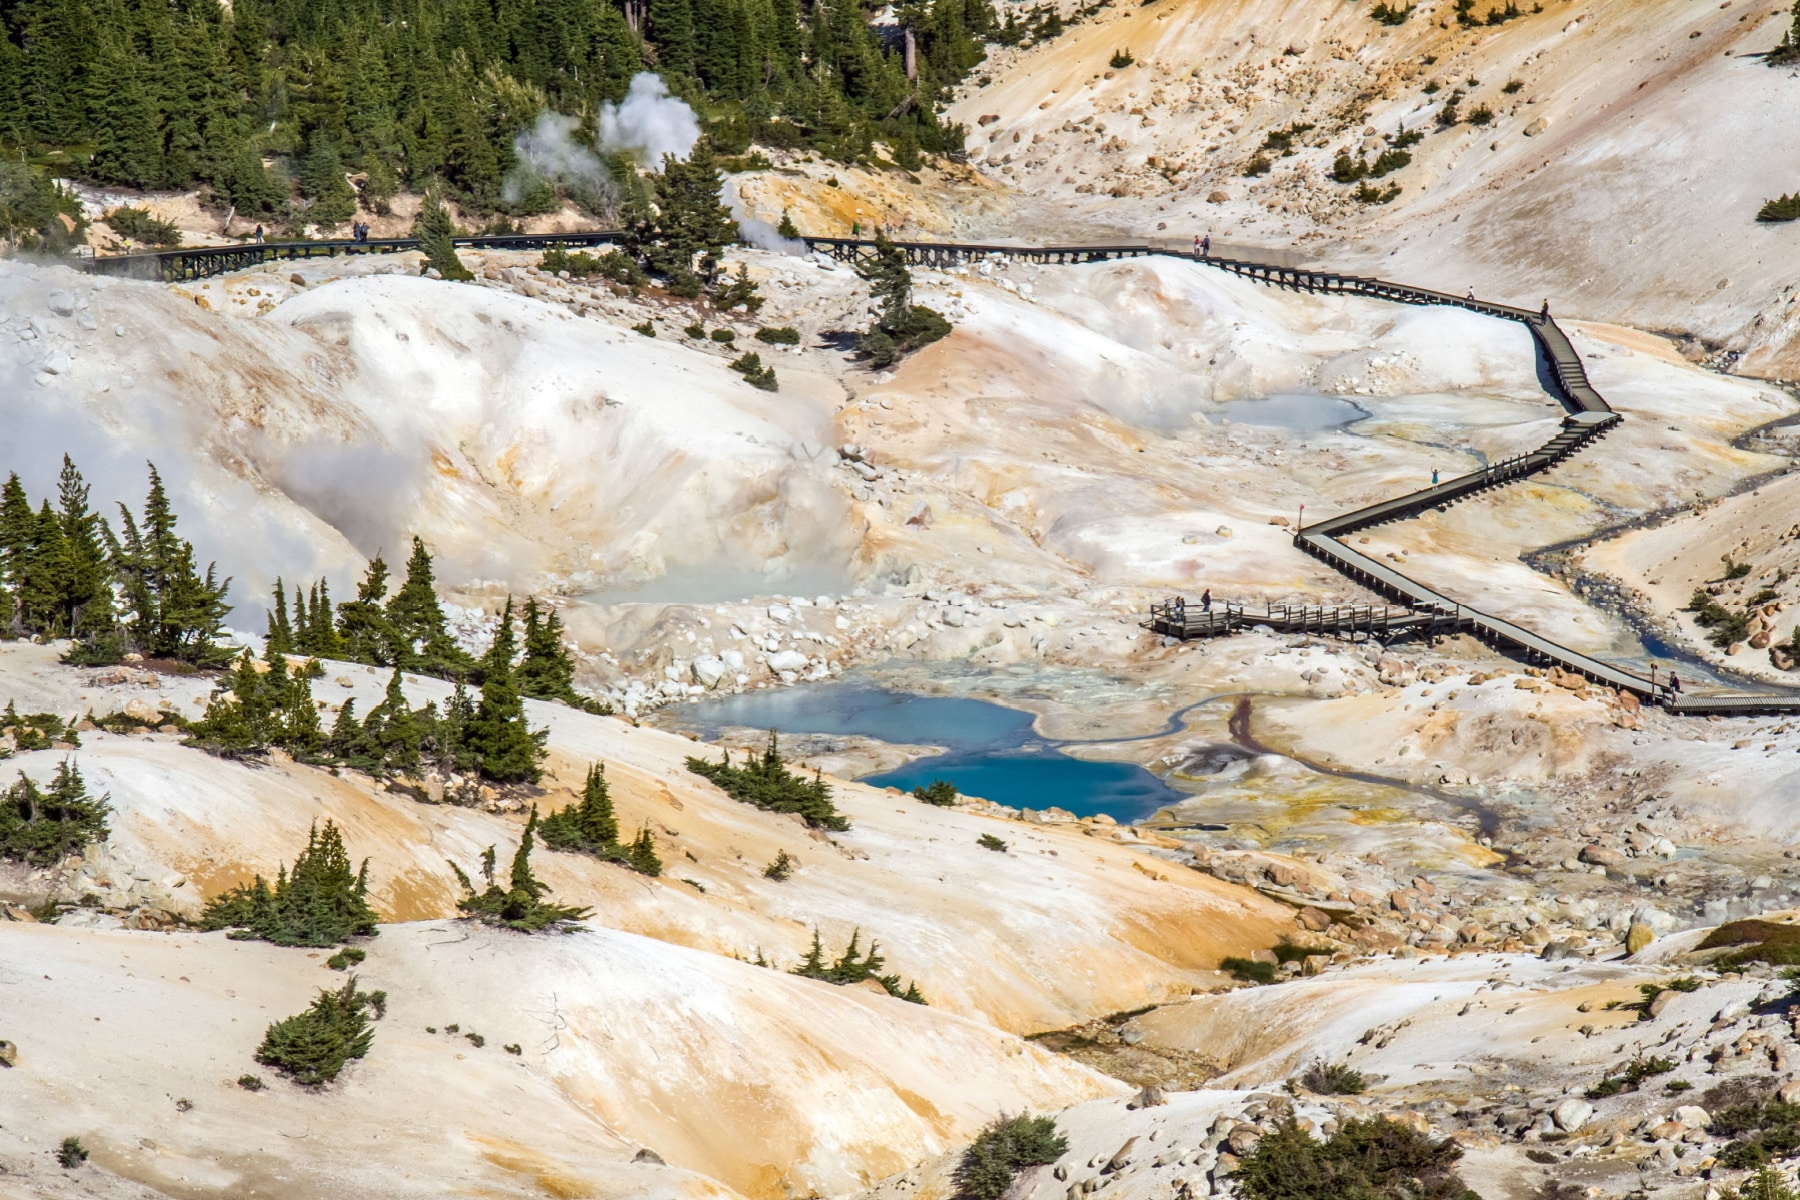 Bumpass Hell thermal basin in Lassen Volcanic National Park, one of the best national parks to visit in July